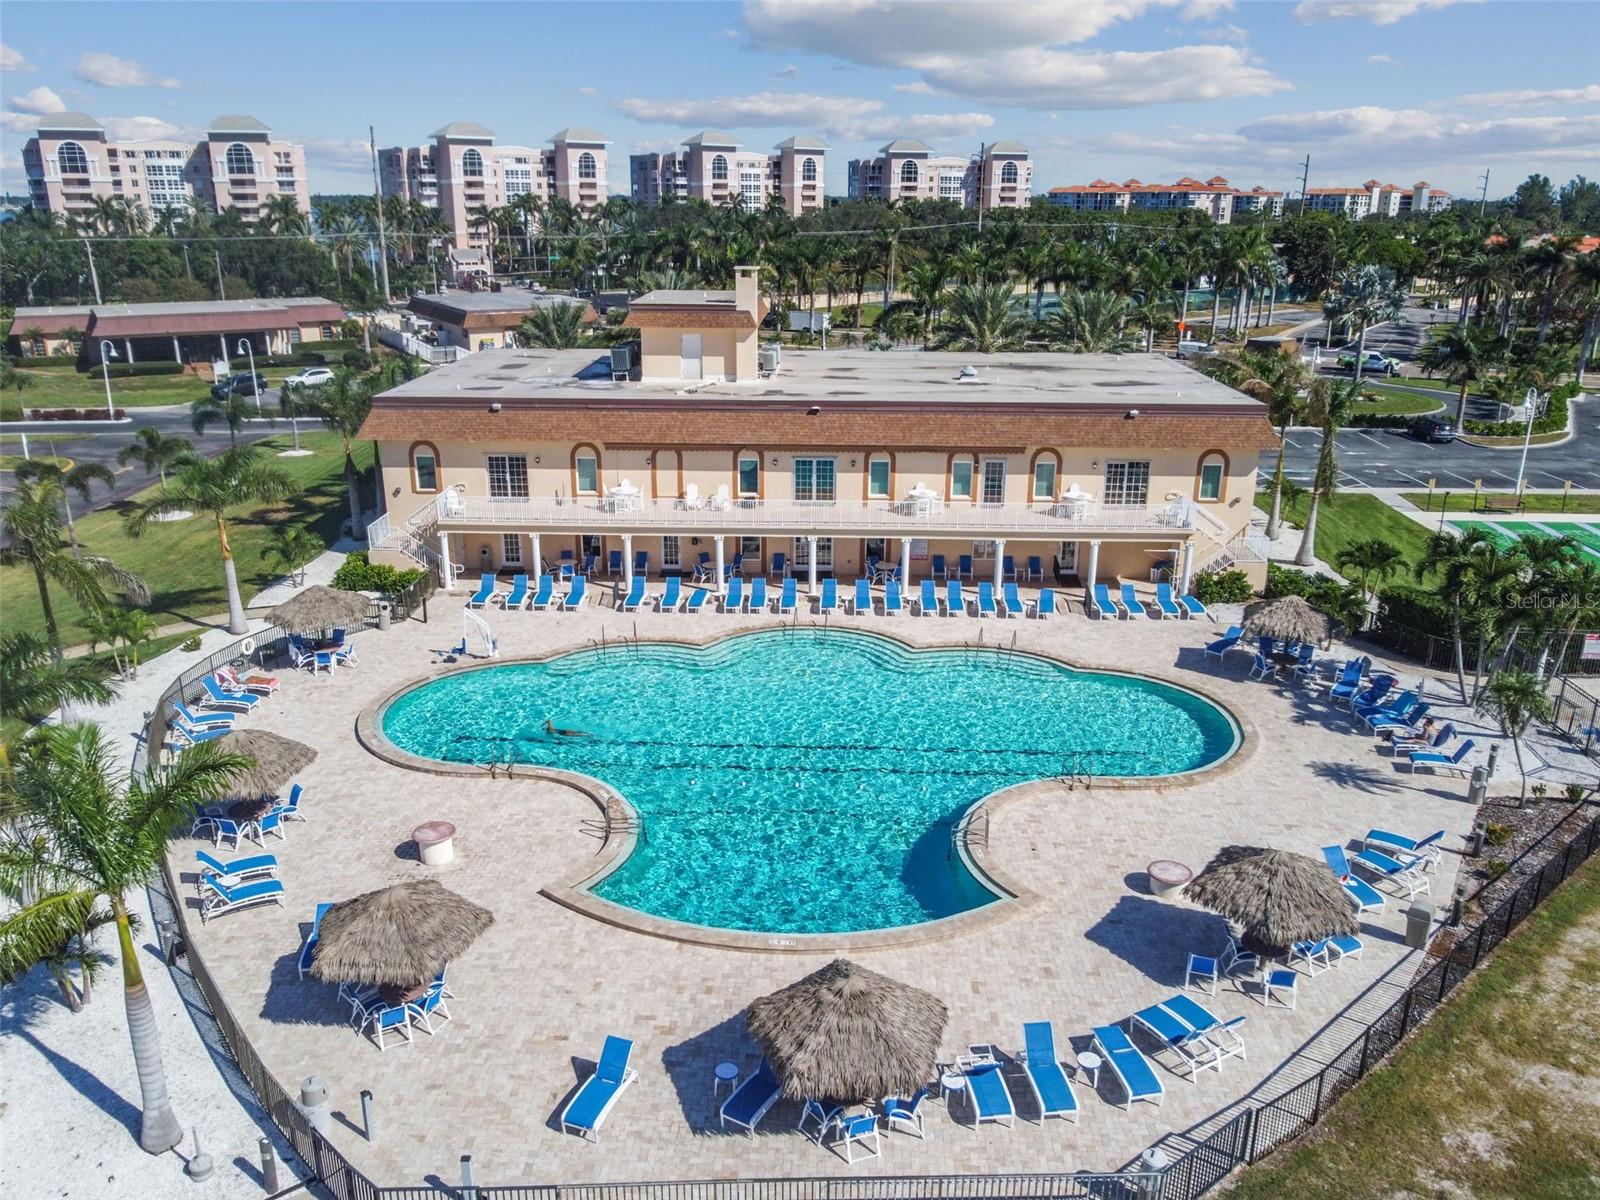 Main Clubhouse pool